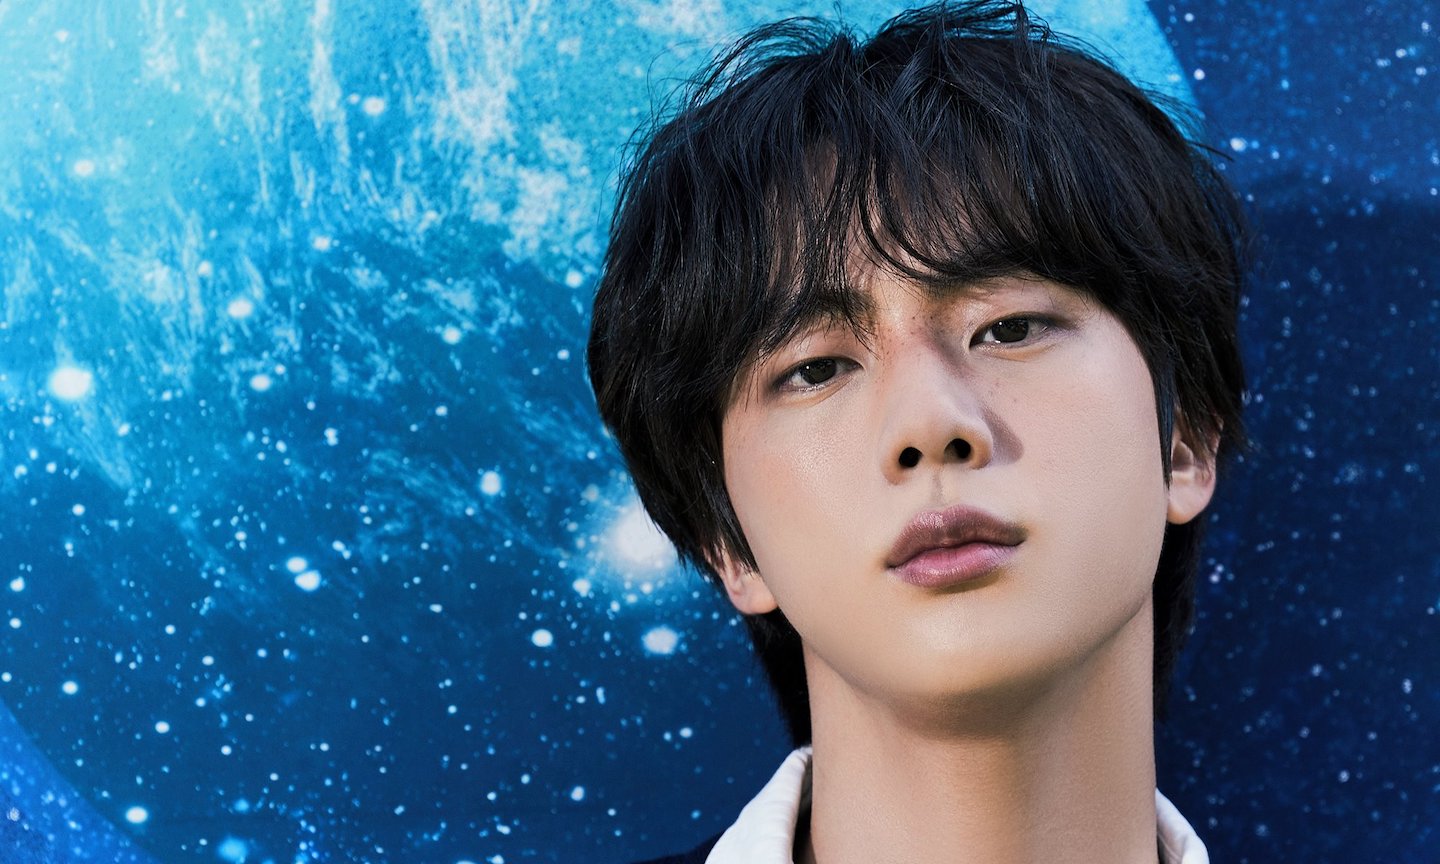 BTS' Jin To Team Up With Mystery Collaborator for Solo Single